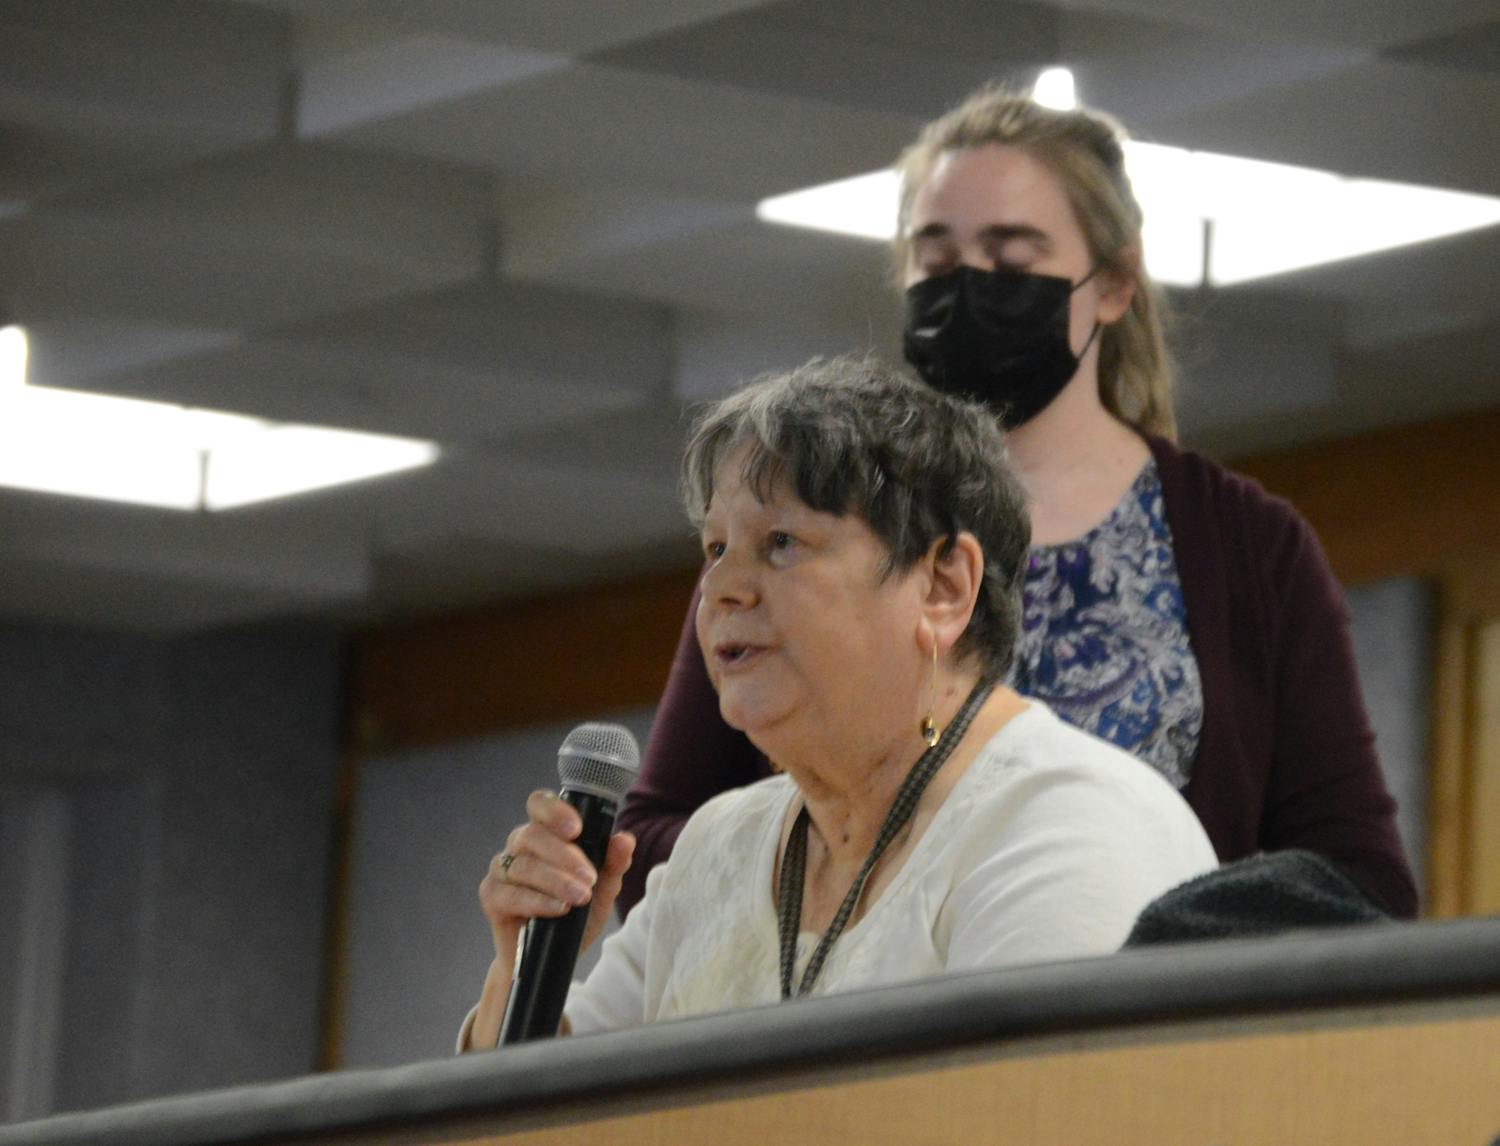 History professor Liana Vardi speaks in favor of an informal confidence vote at Tuesday's CAS faculty meeting, after low attendance at the meeting prevented a formal vote.